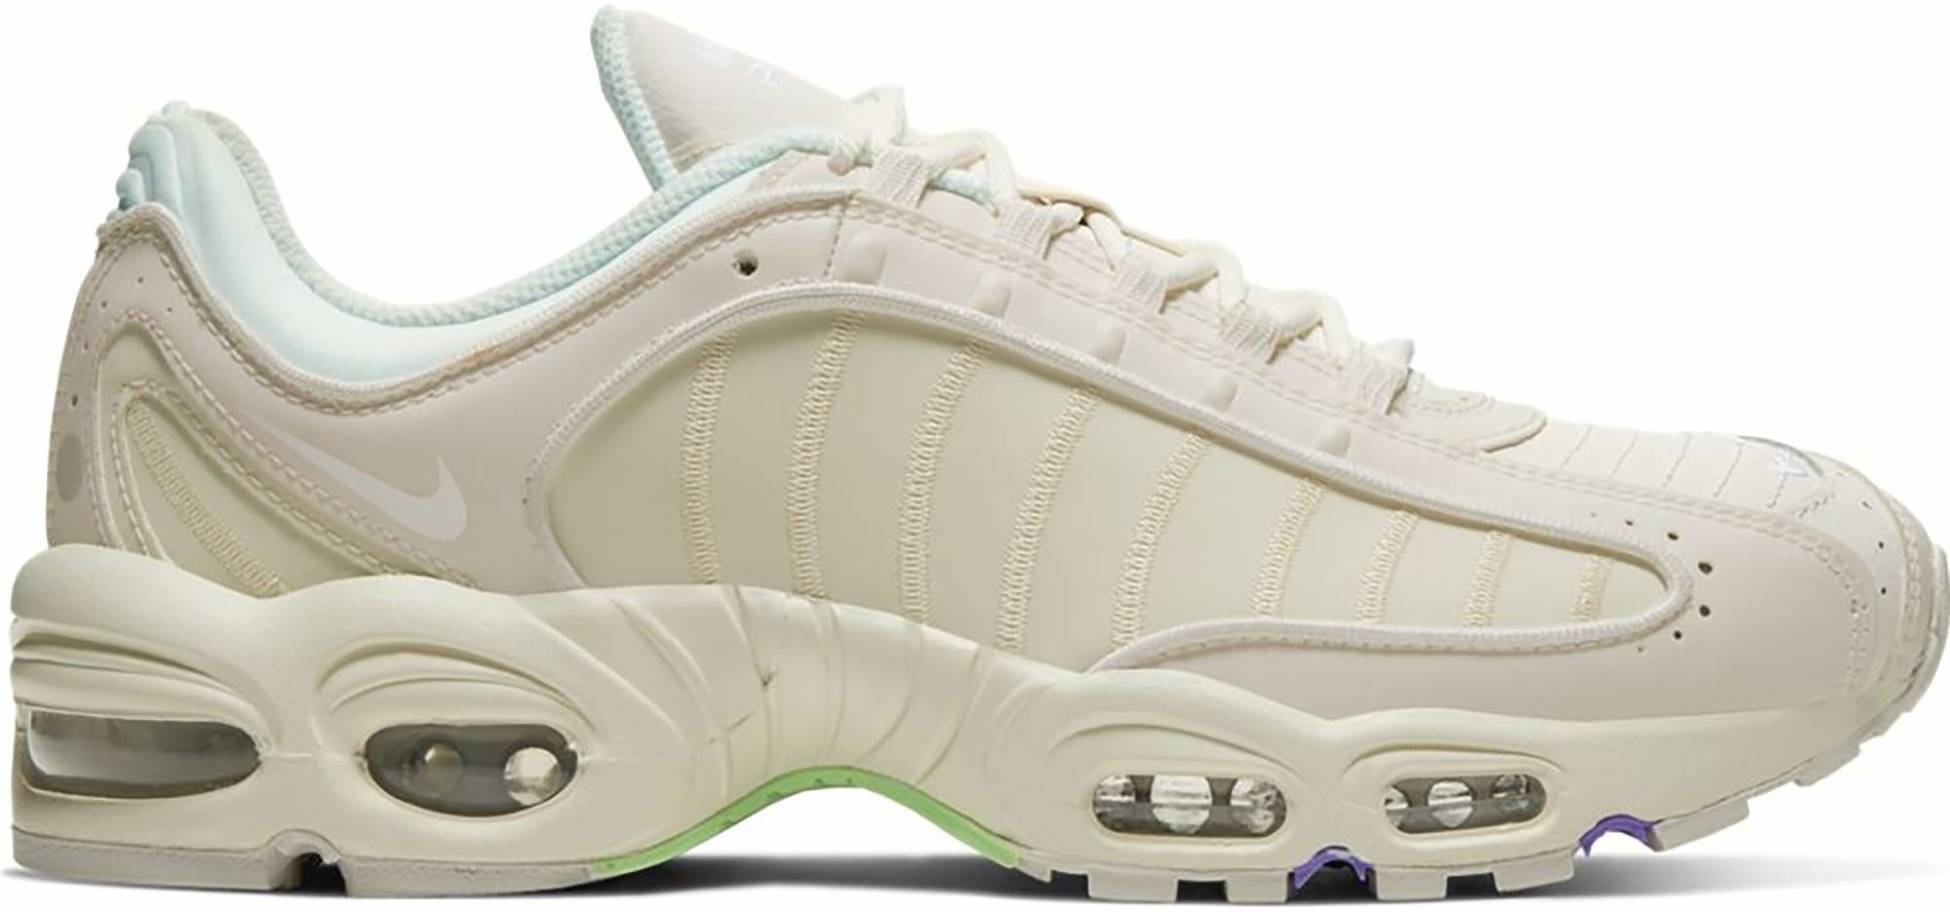 Nike Air Max Tailwind 99 sneakers in white (only $100) | RunRepeat